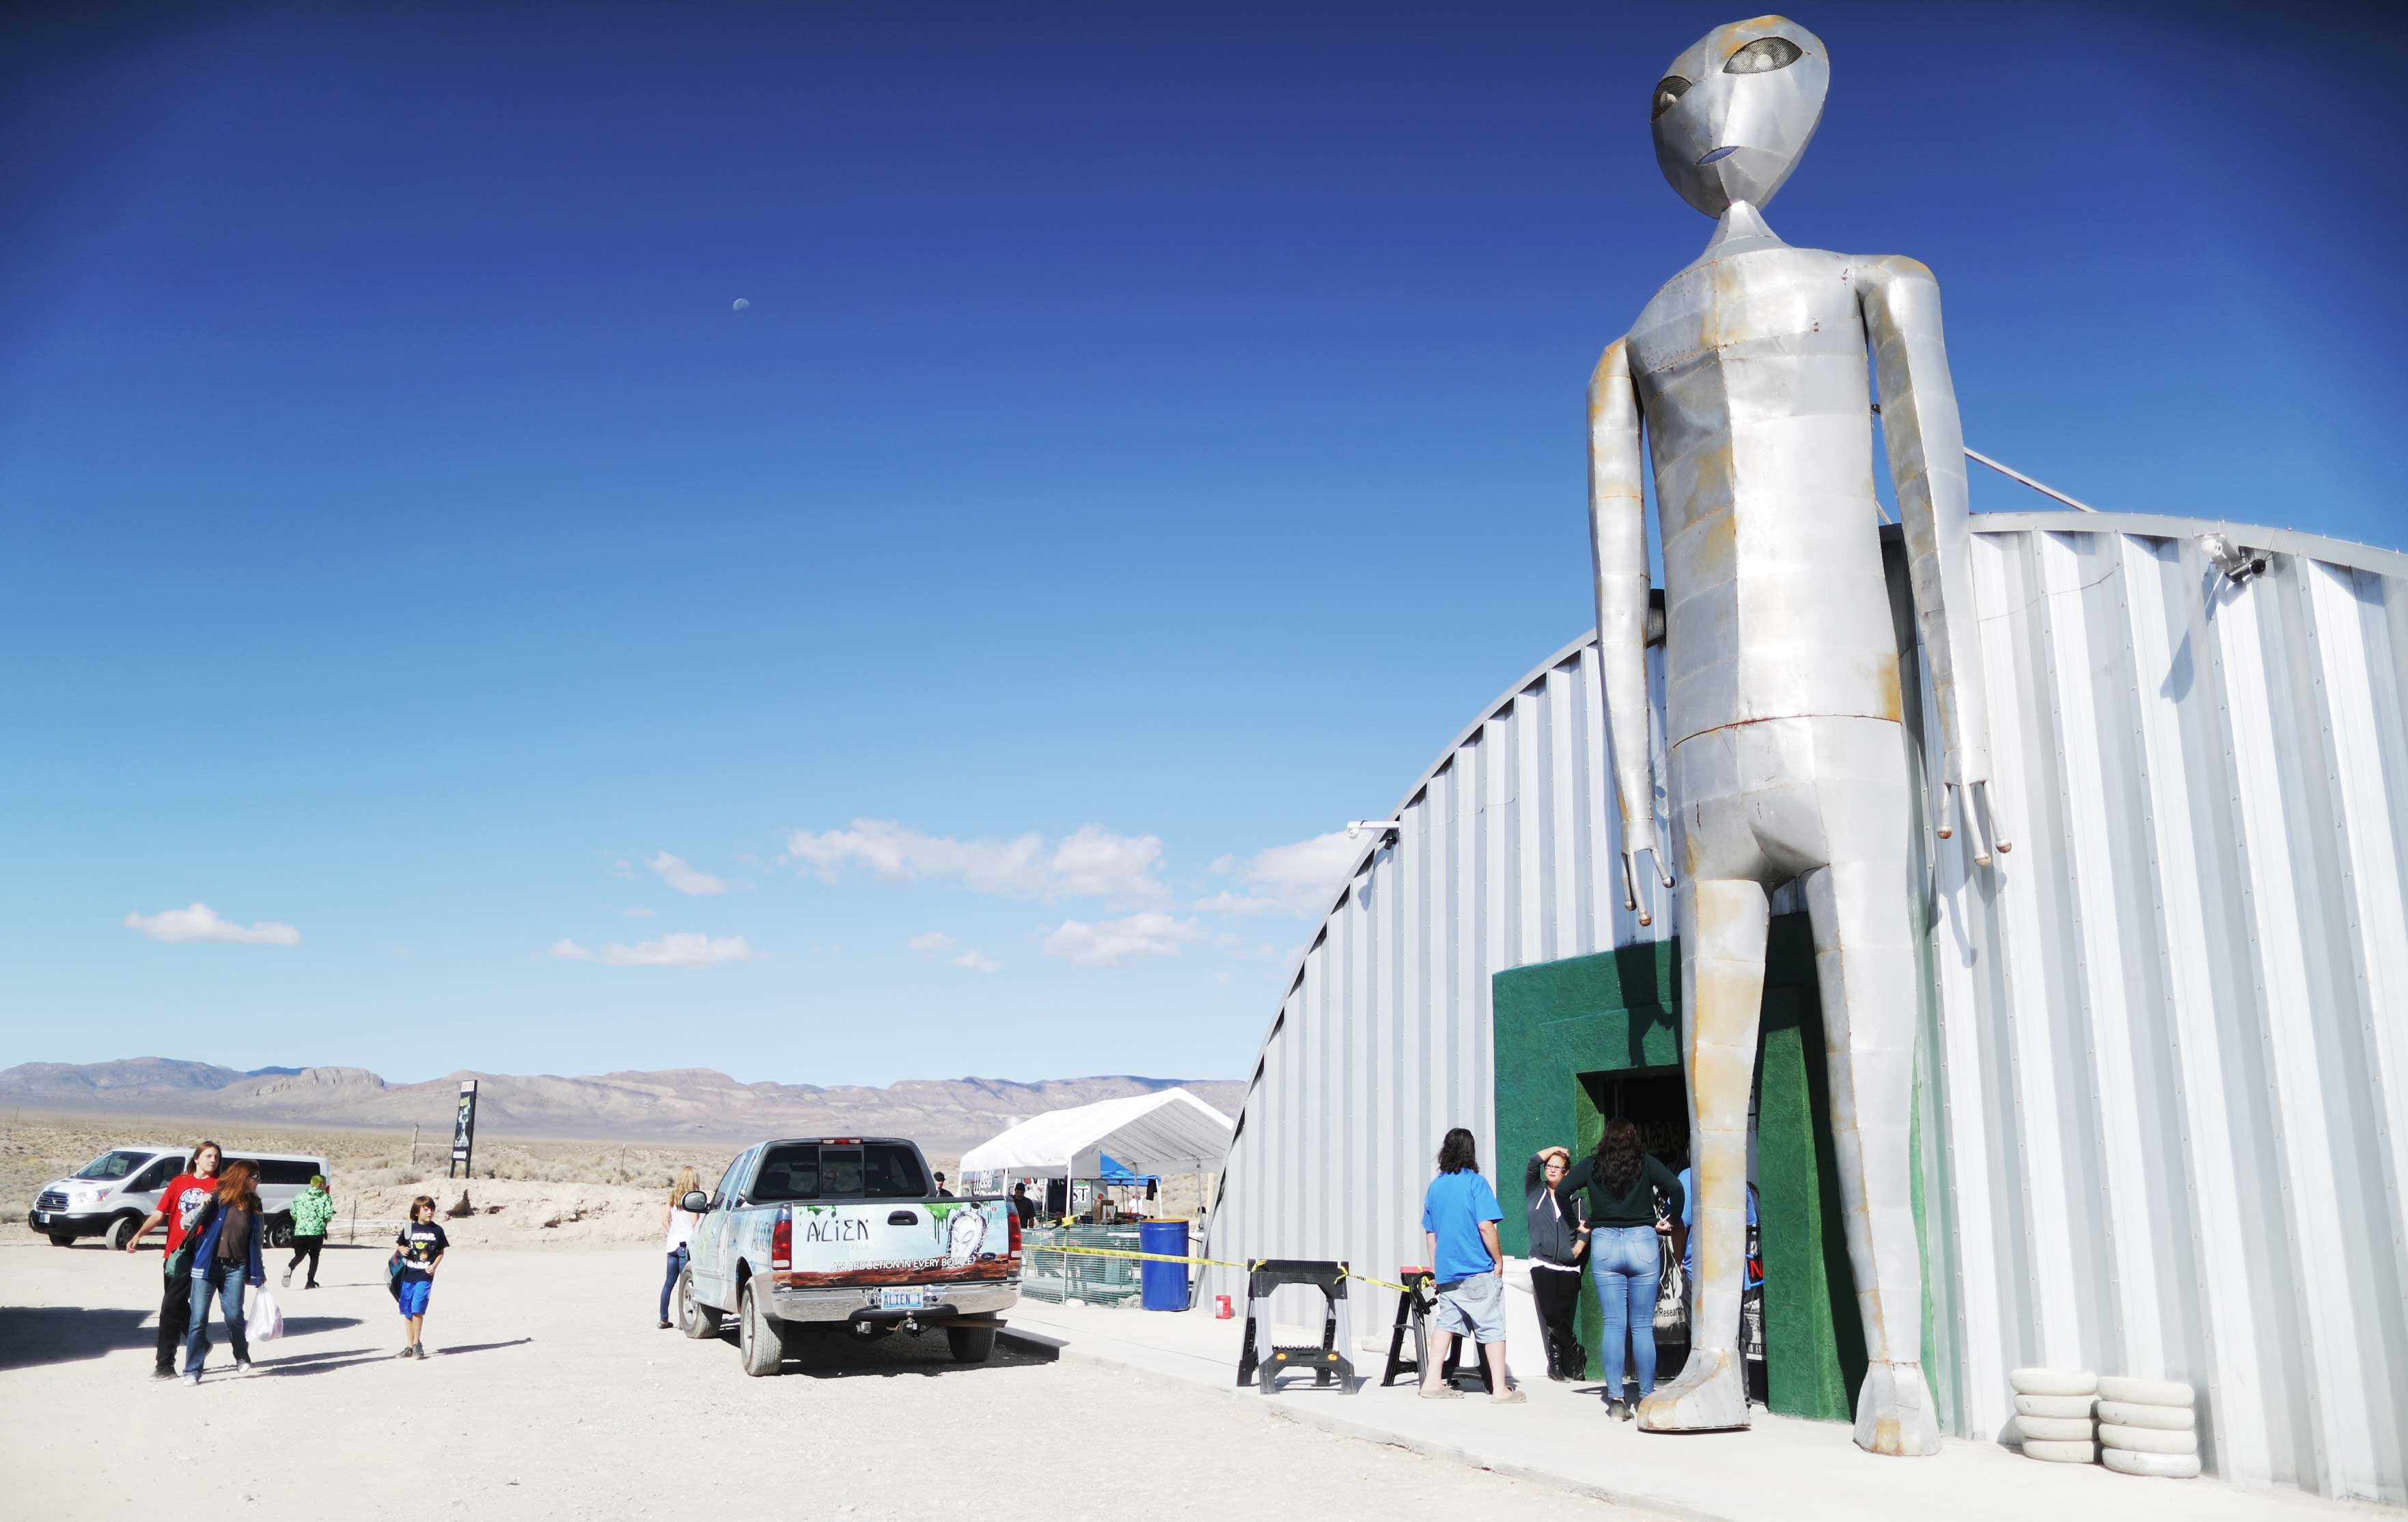 A giant metal sculpture of an alien stands outside a trailer in the desert.